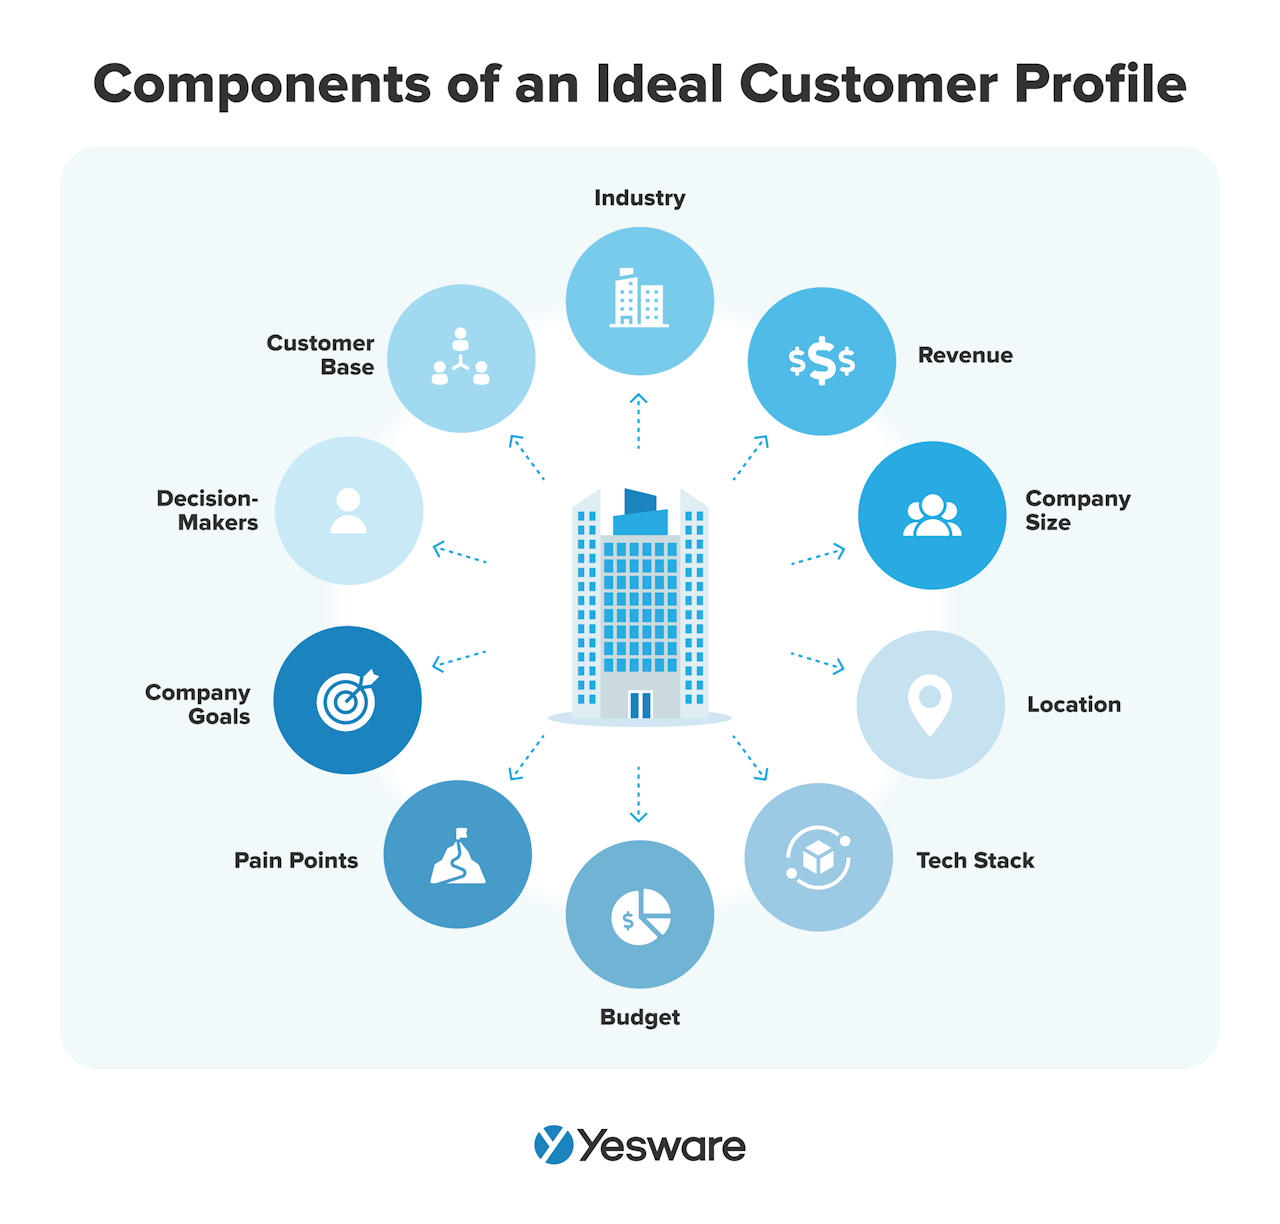 components of an ideal customer profile (ICP)